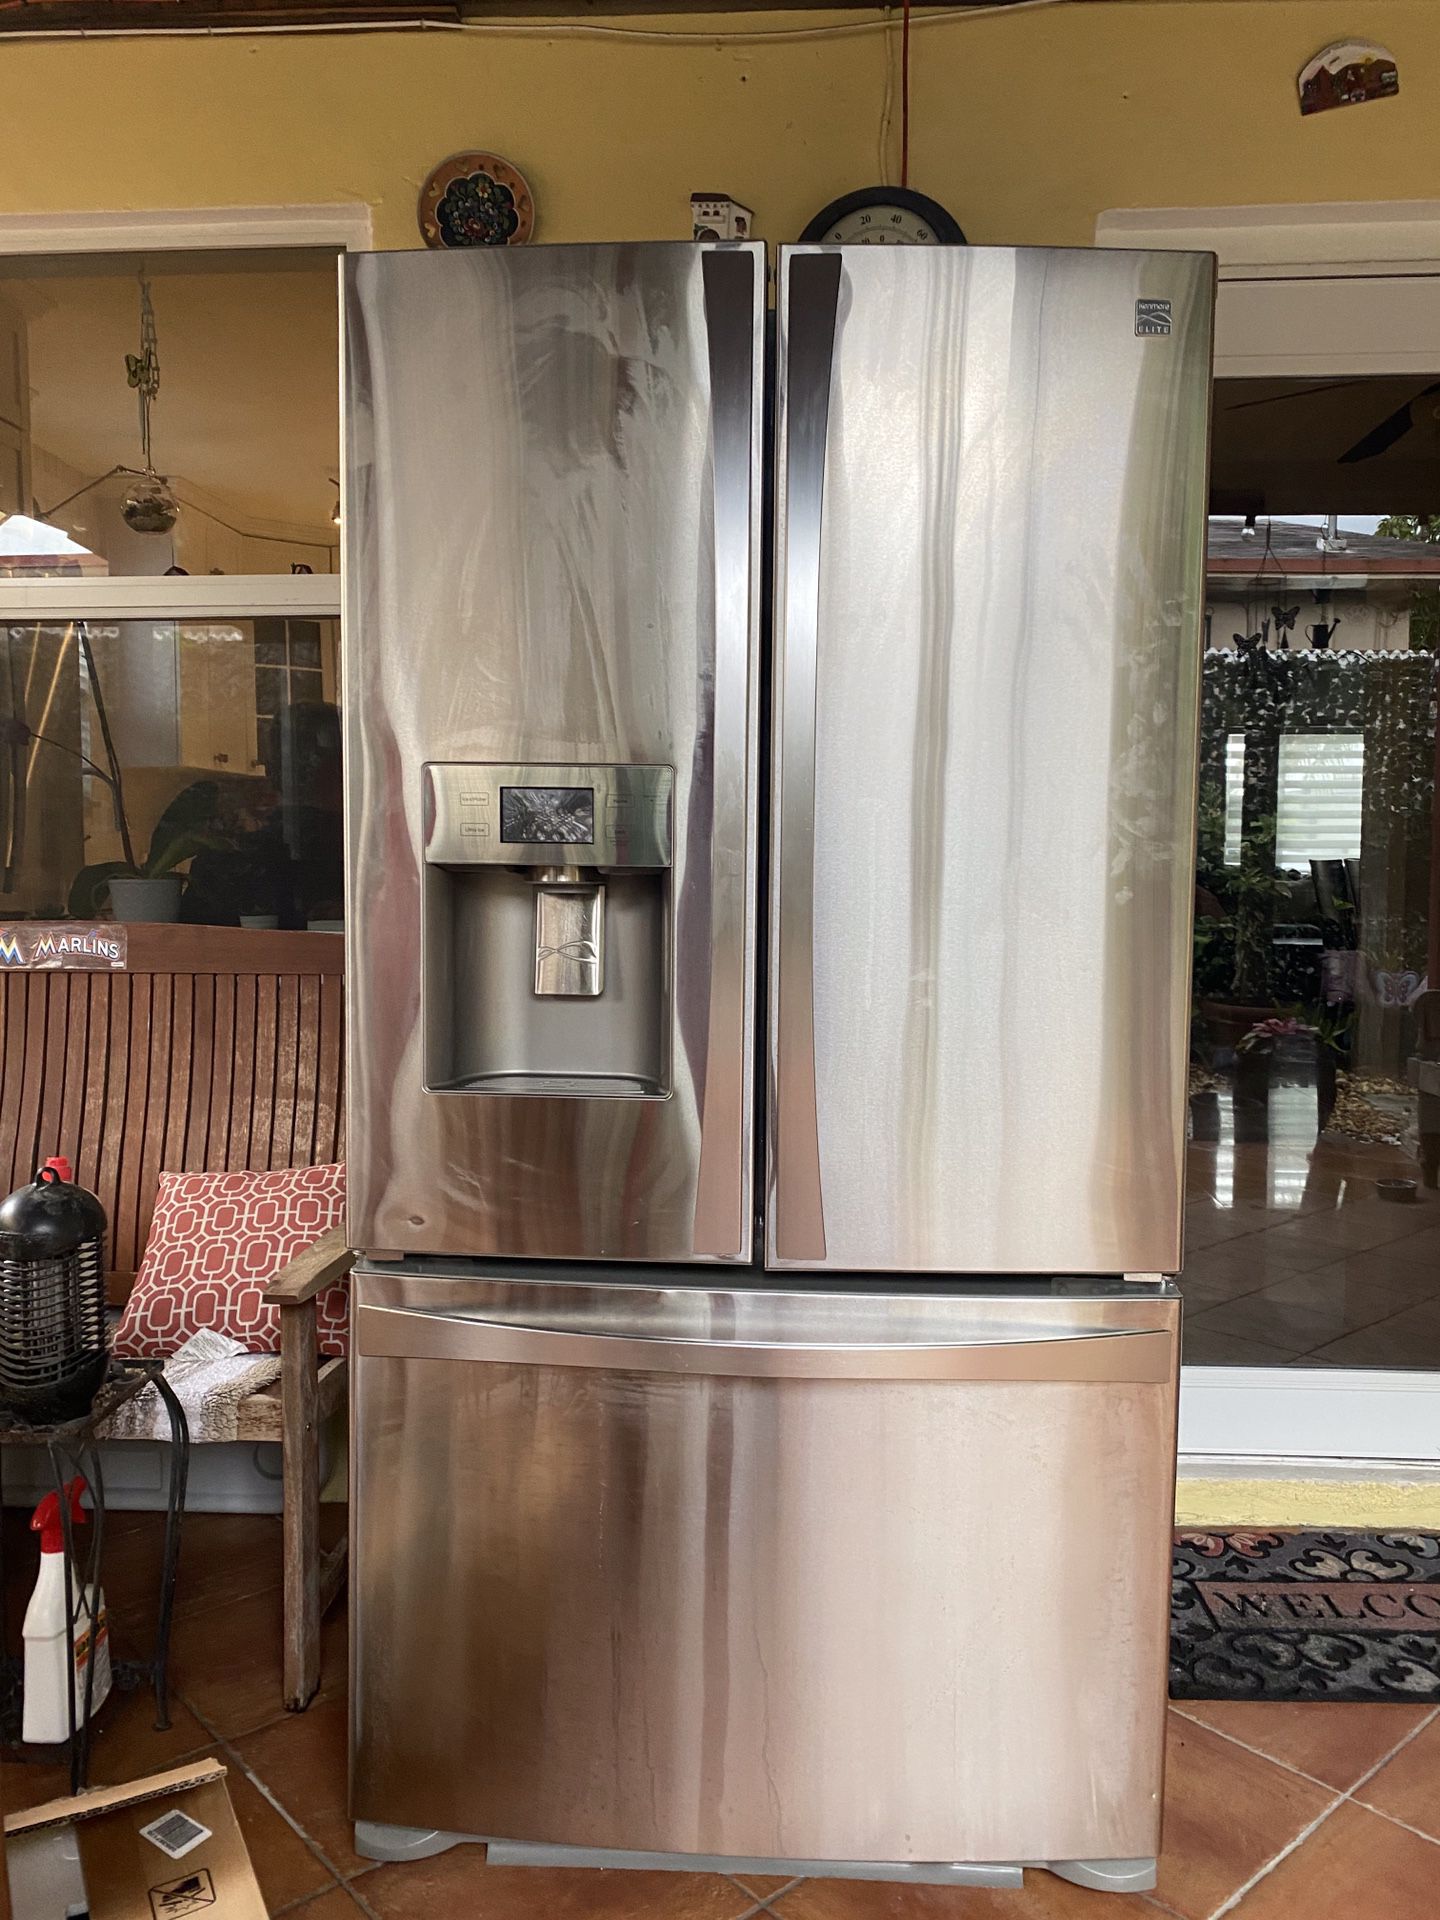 KENMORE ELITE stainless steel refrigerator with water and ice maker dispenser